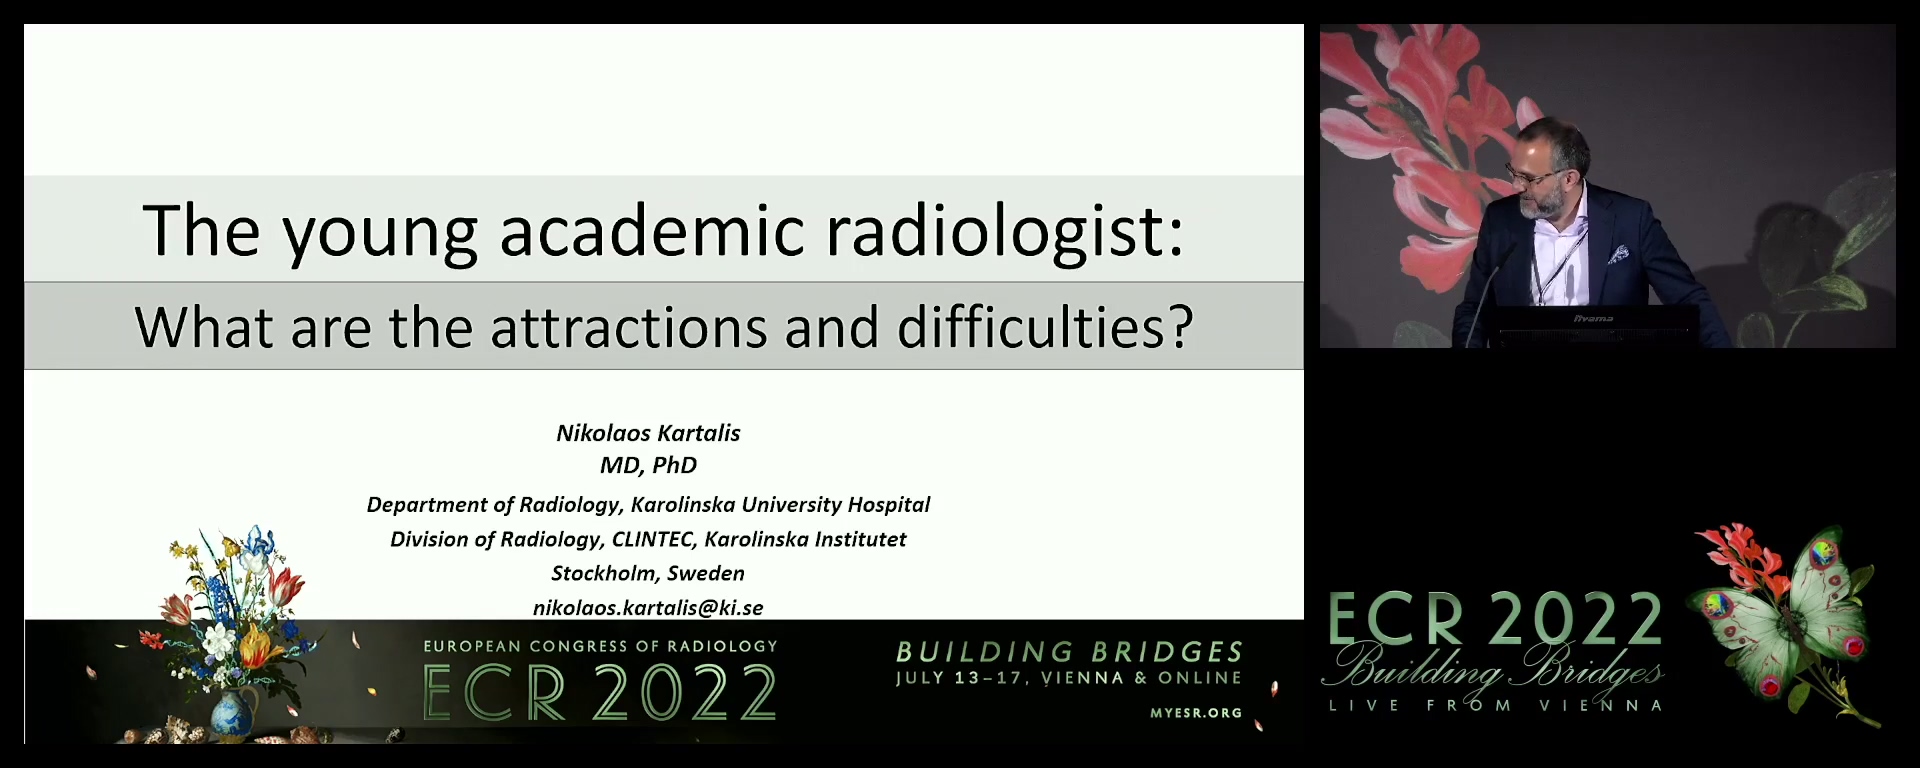 The young academic radiologist: what are the attractions and difficulties